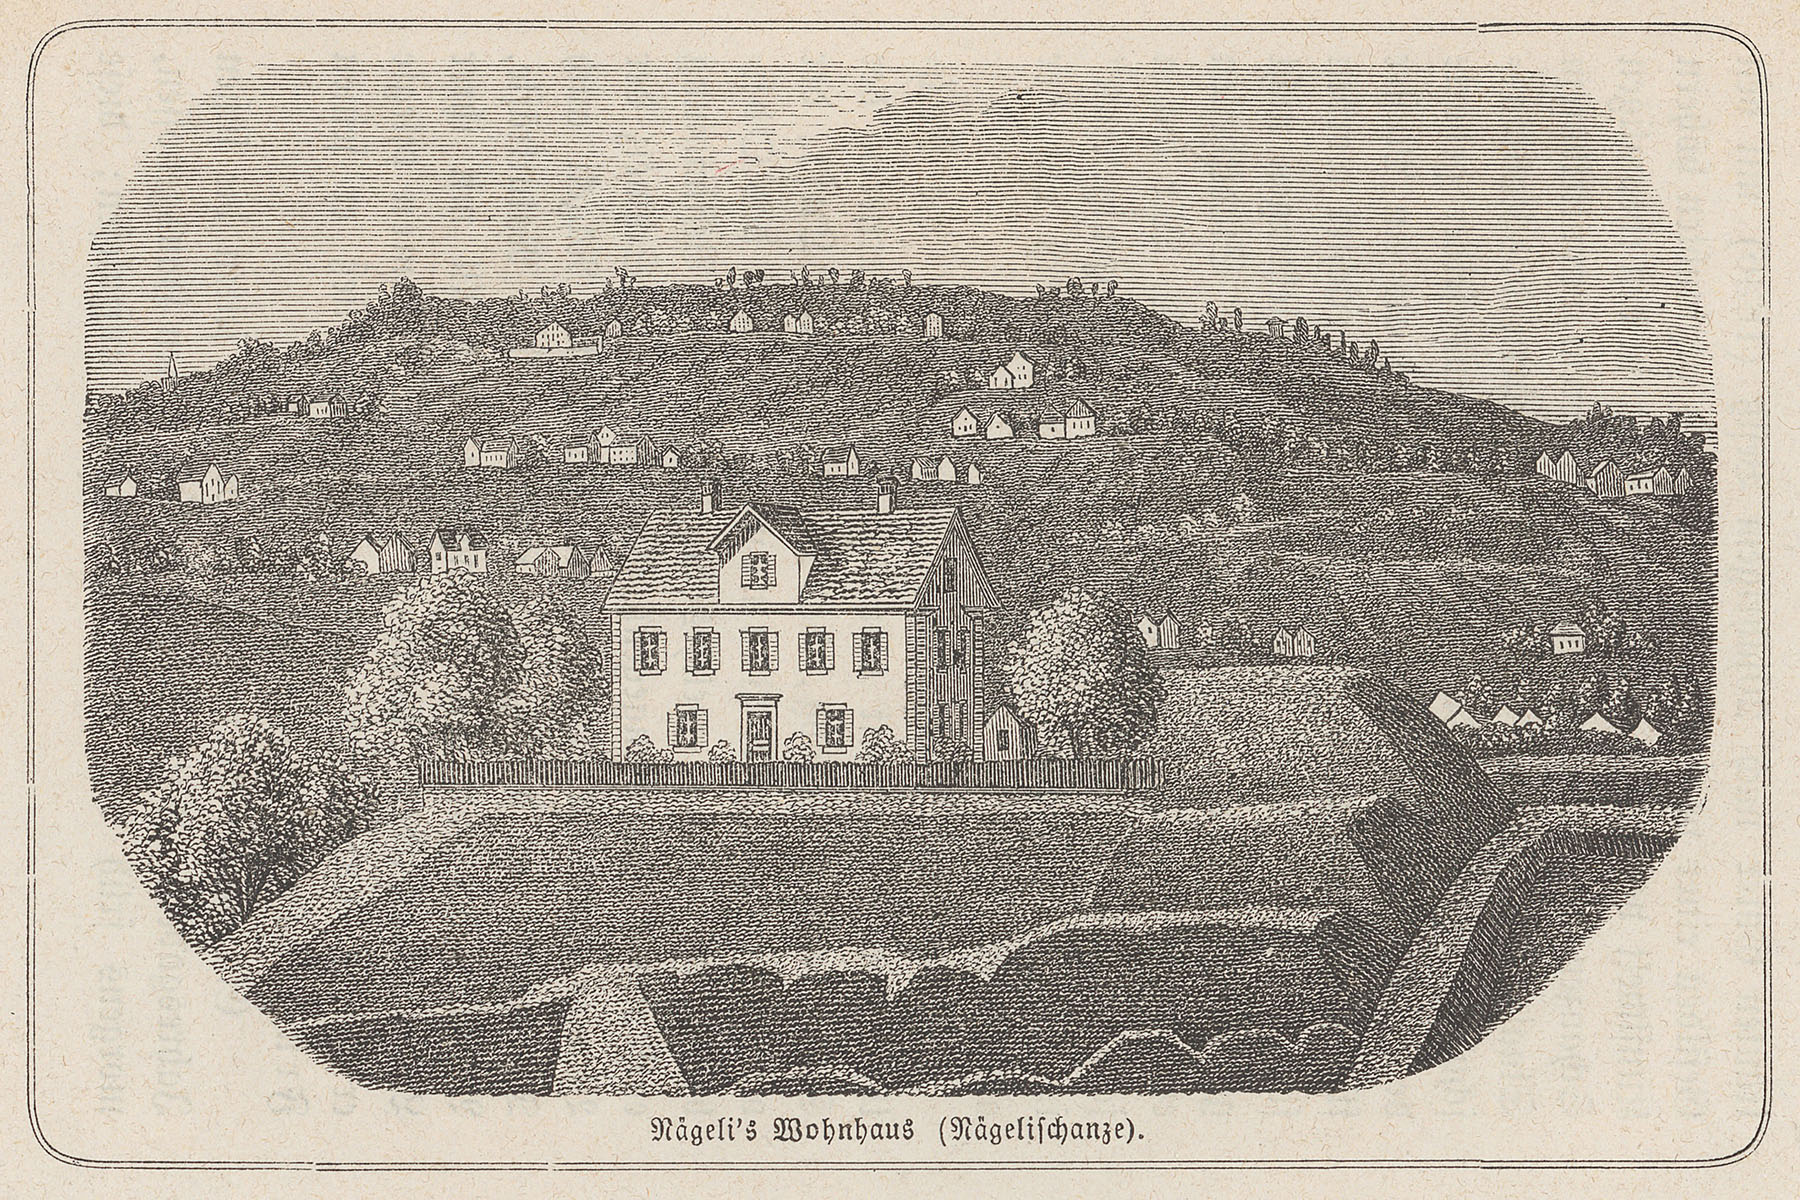 Nägeli’s home on the ‘Nägelisschanze’, between 1840 and 1880. The ‘Nägelischanze’ is part of the ‘Rämibollwerk,’ which, in turn, is part of the city’s fortifications from this time. (Image: ZB Zürich)